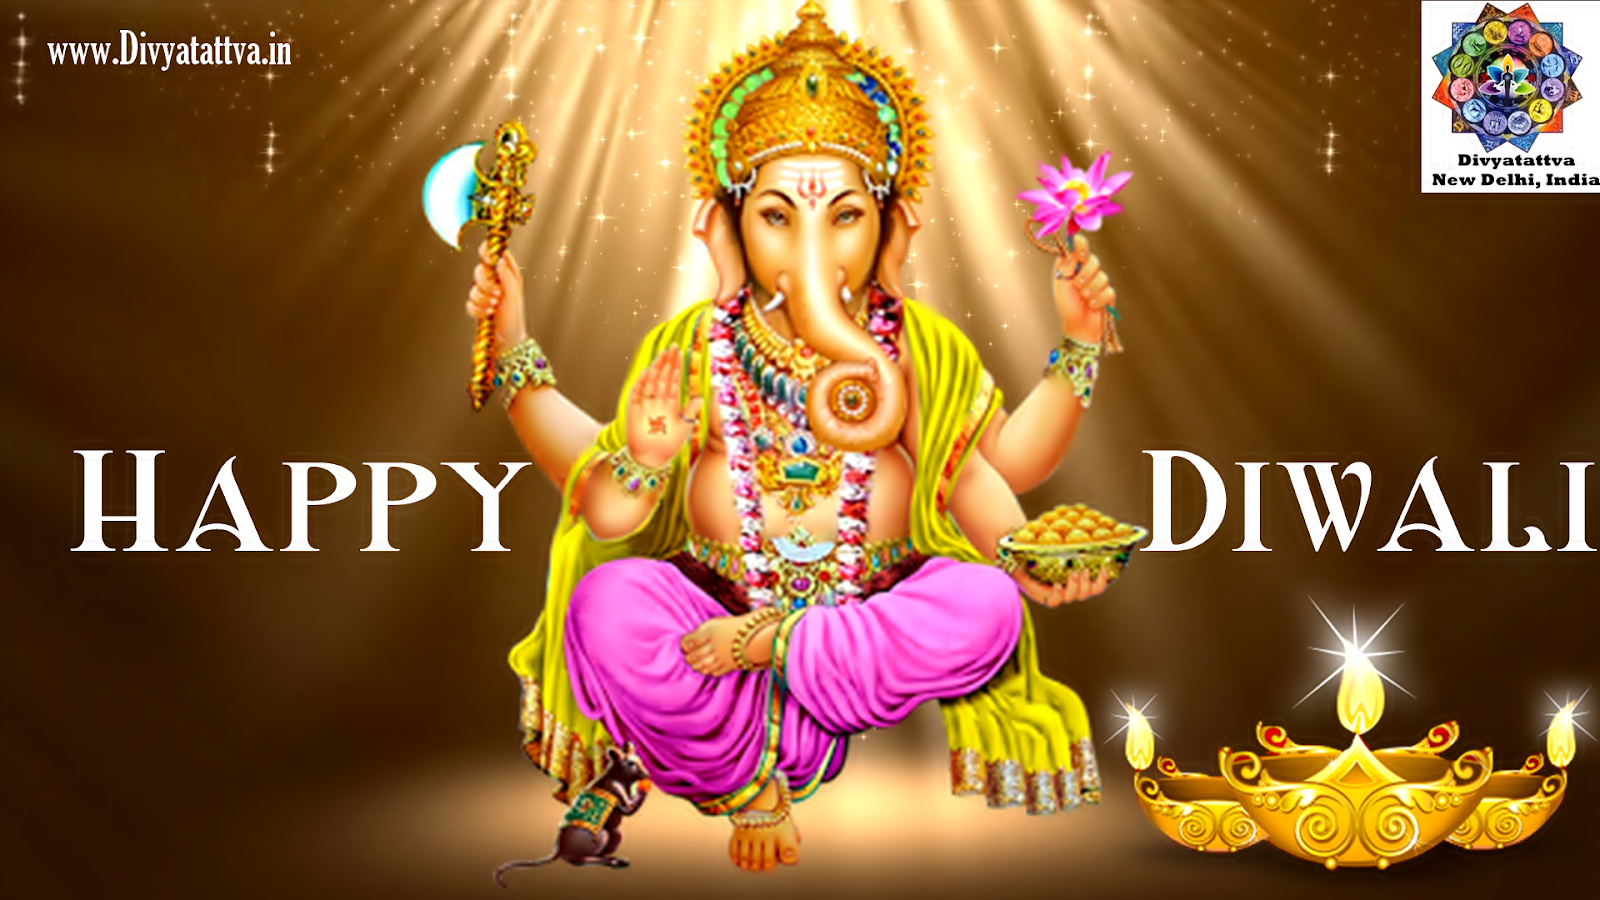 Happy Diwali HD Wallpapers Free Best Wishes Messages Backgrounds